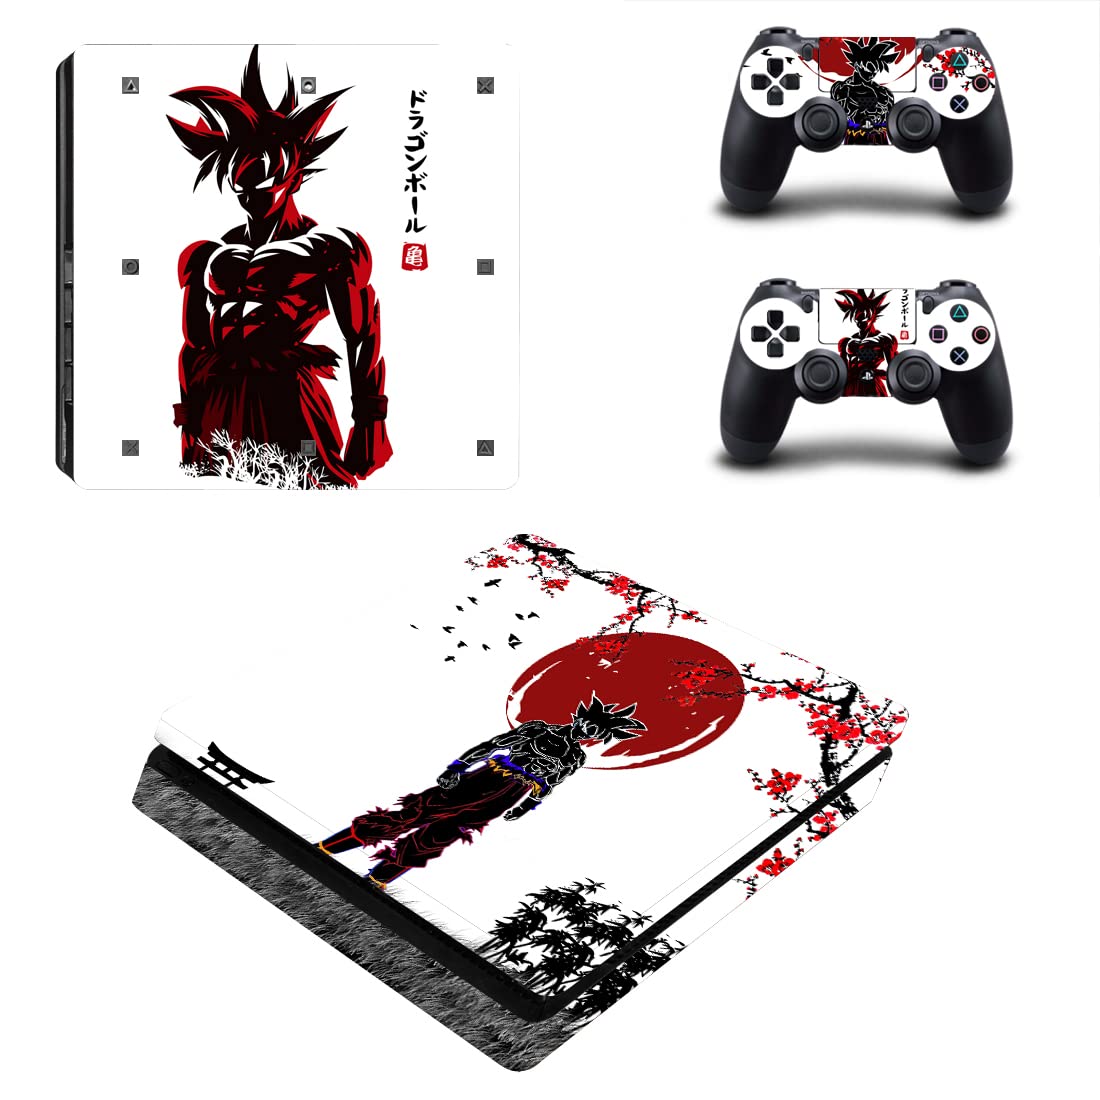 Anime Movie Character PS4 Controller Skin Sticker Decal Design for  PlayStation 4 | eBay